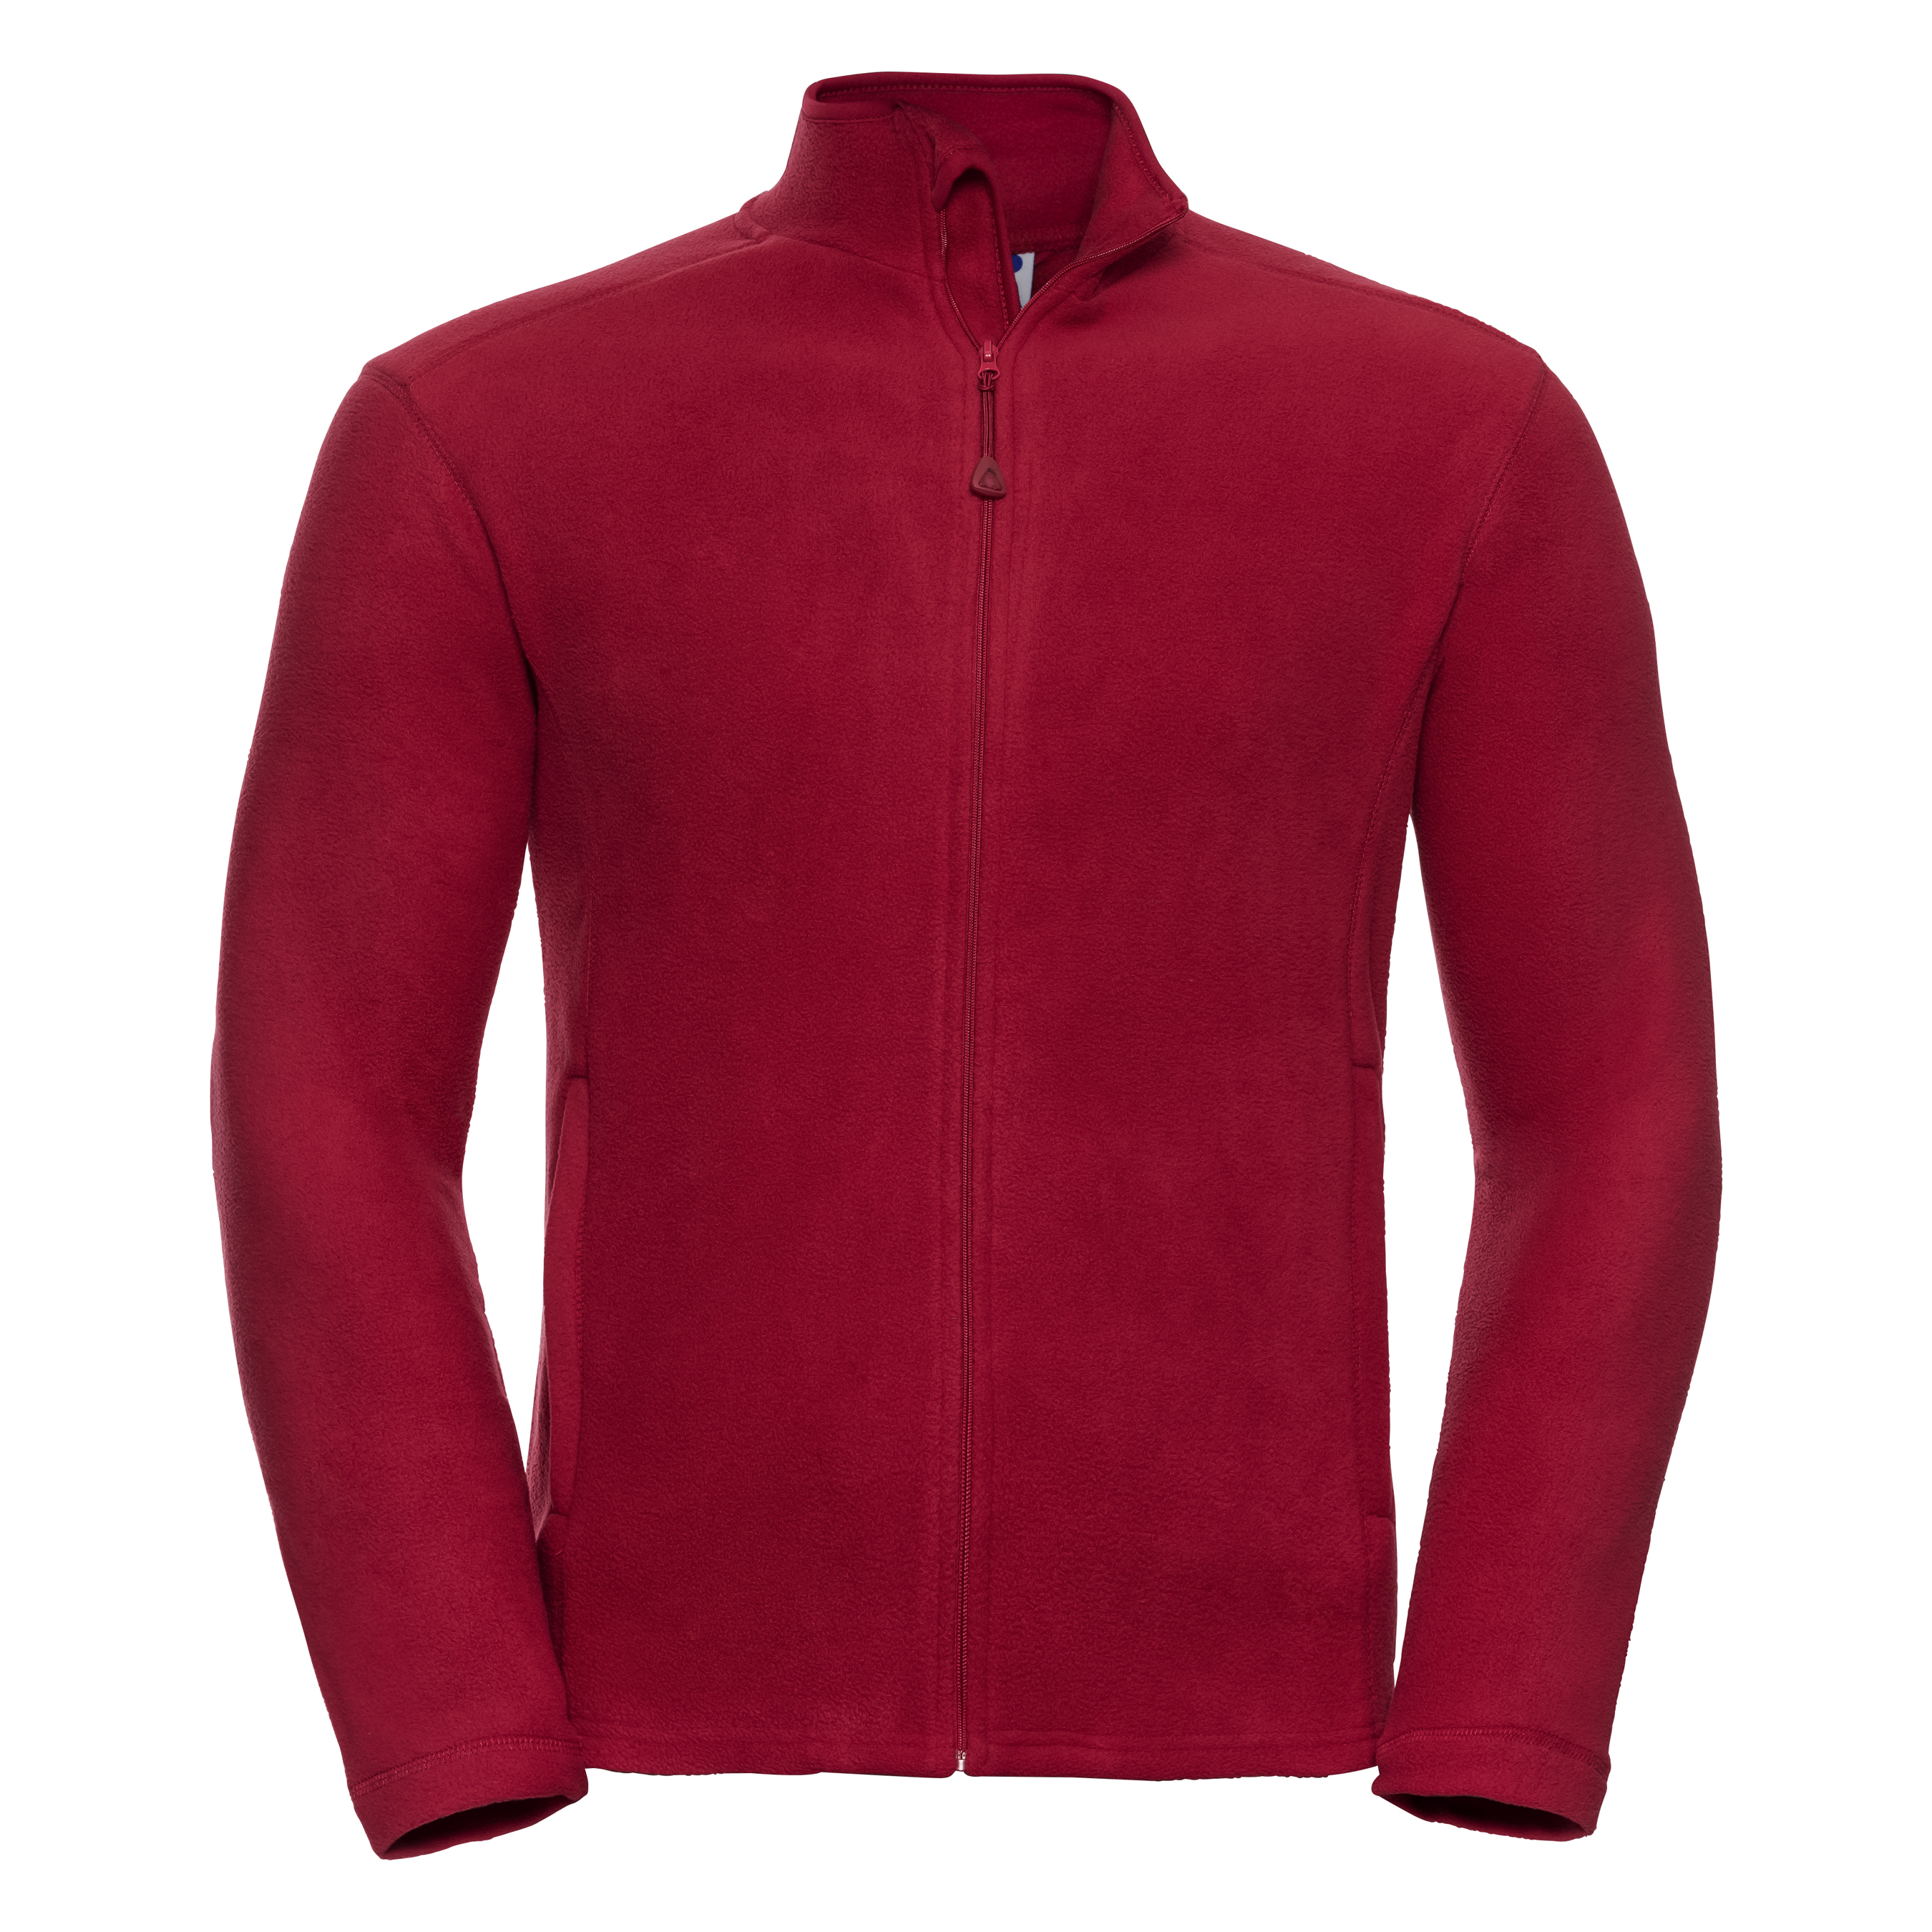 ax-httpswebsystems.s3.amazonaws.comtmp_for_downloadrussell-full-zip-microfleece-classic-red.jpeg